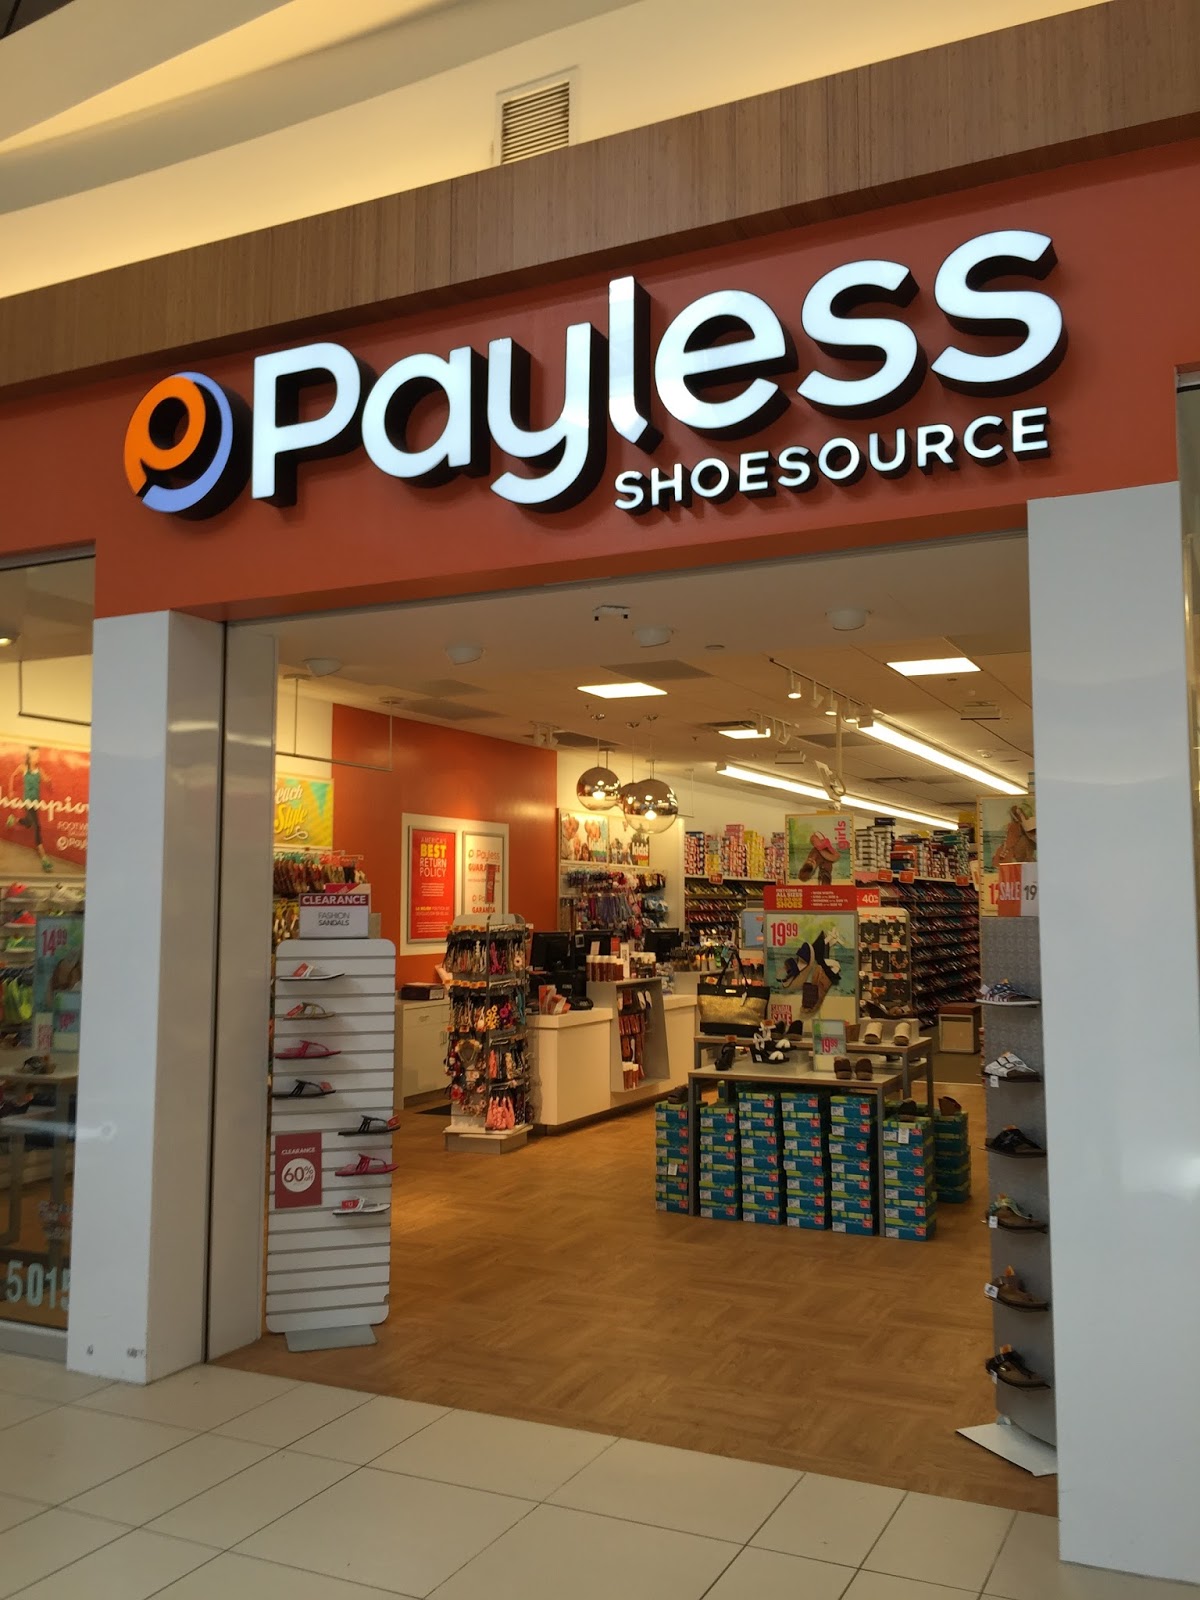 Payless Shoes Coupons | Printable Coupons & Mobile